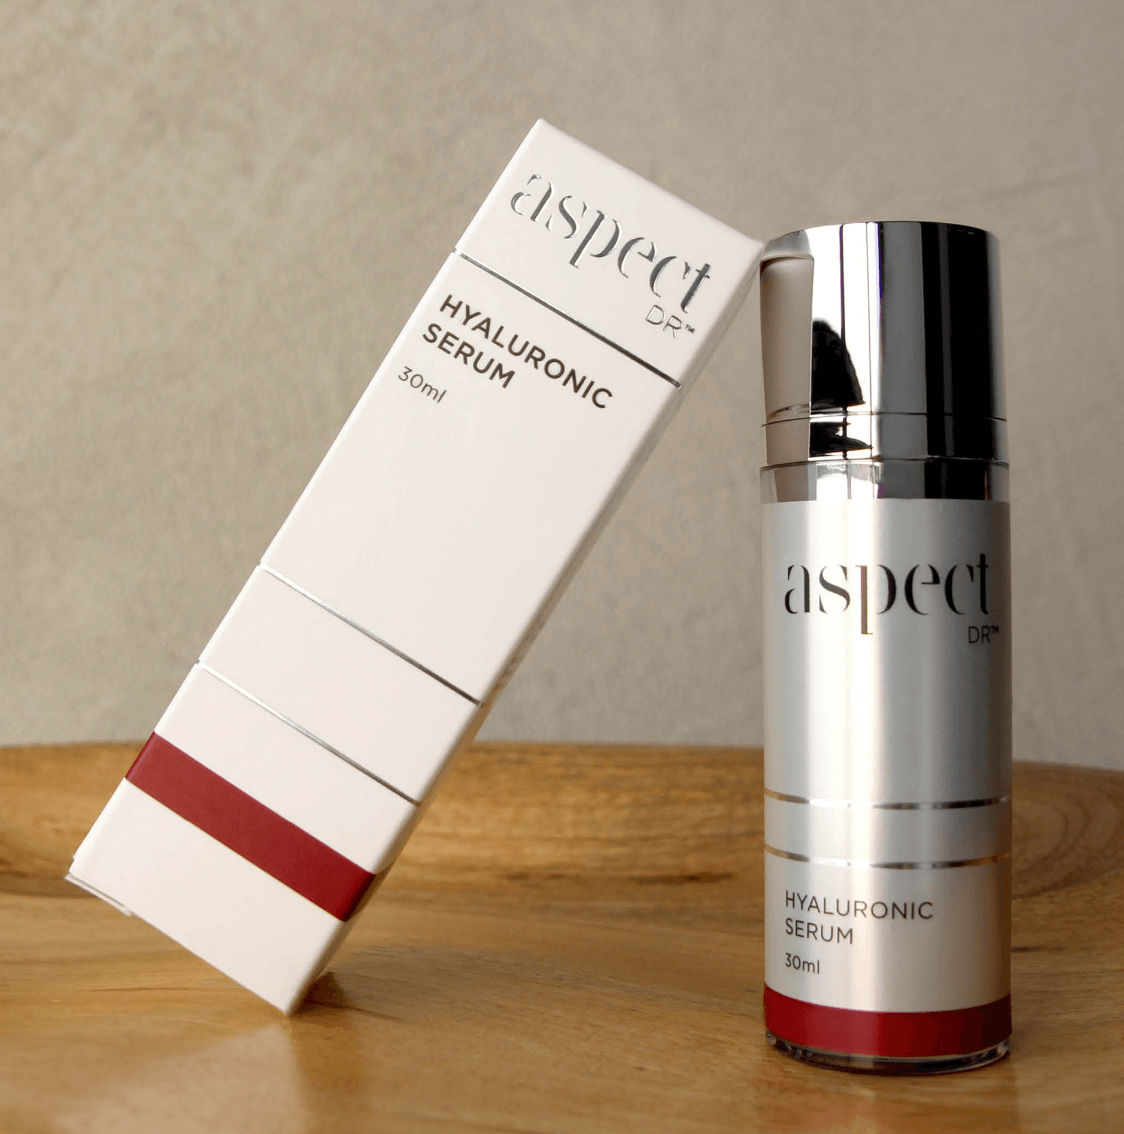 ASPECT DR HYALURONIC SERUM 30ml - Exquisite Laser Clinic